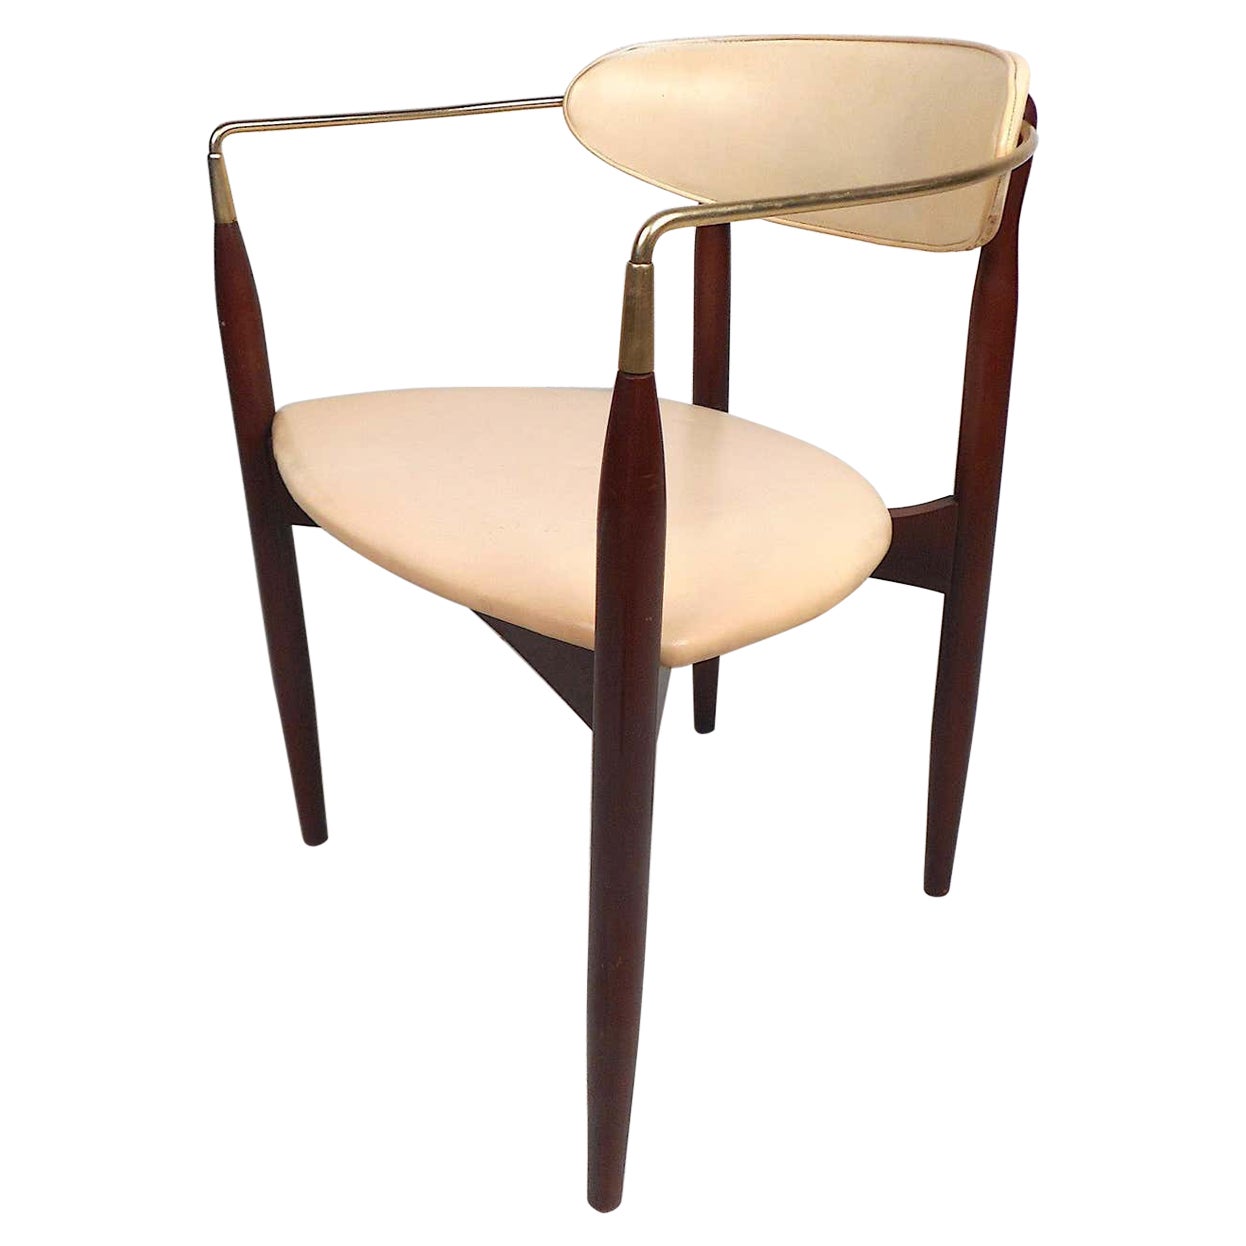 Mid-Century Modern Chair by Kedawood Furniture